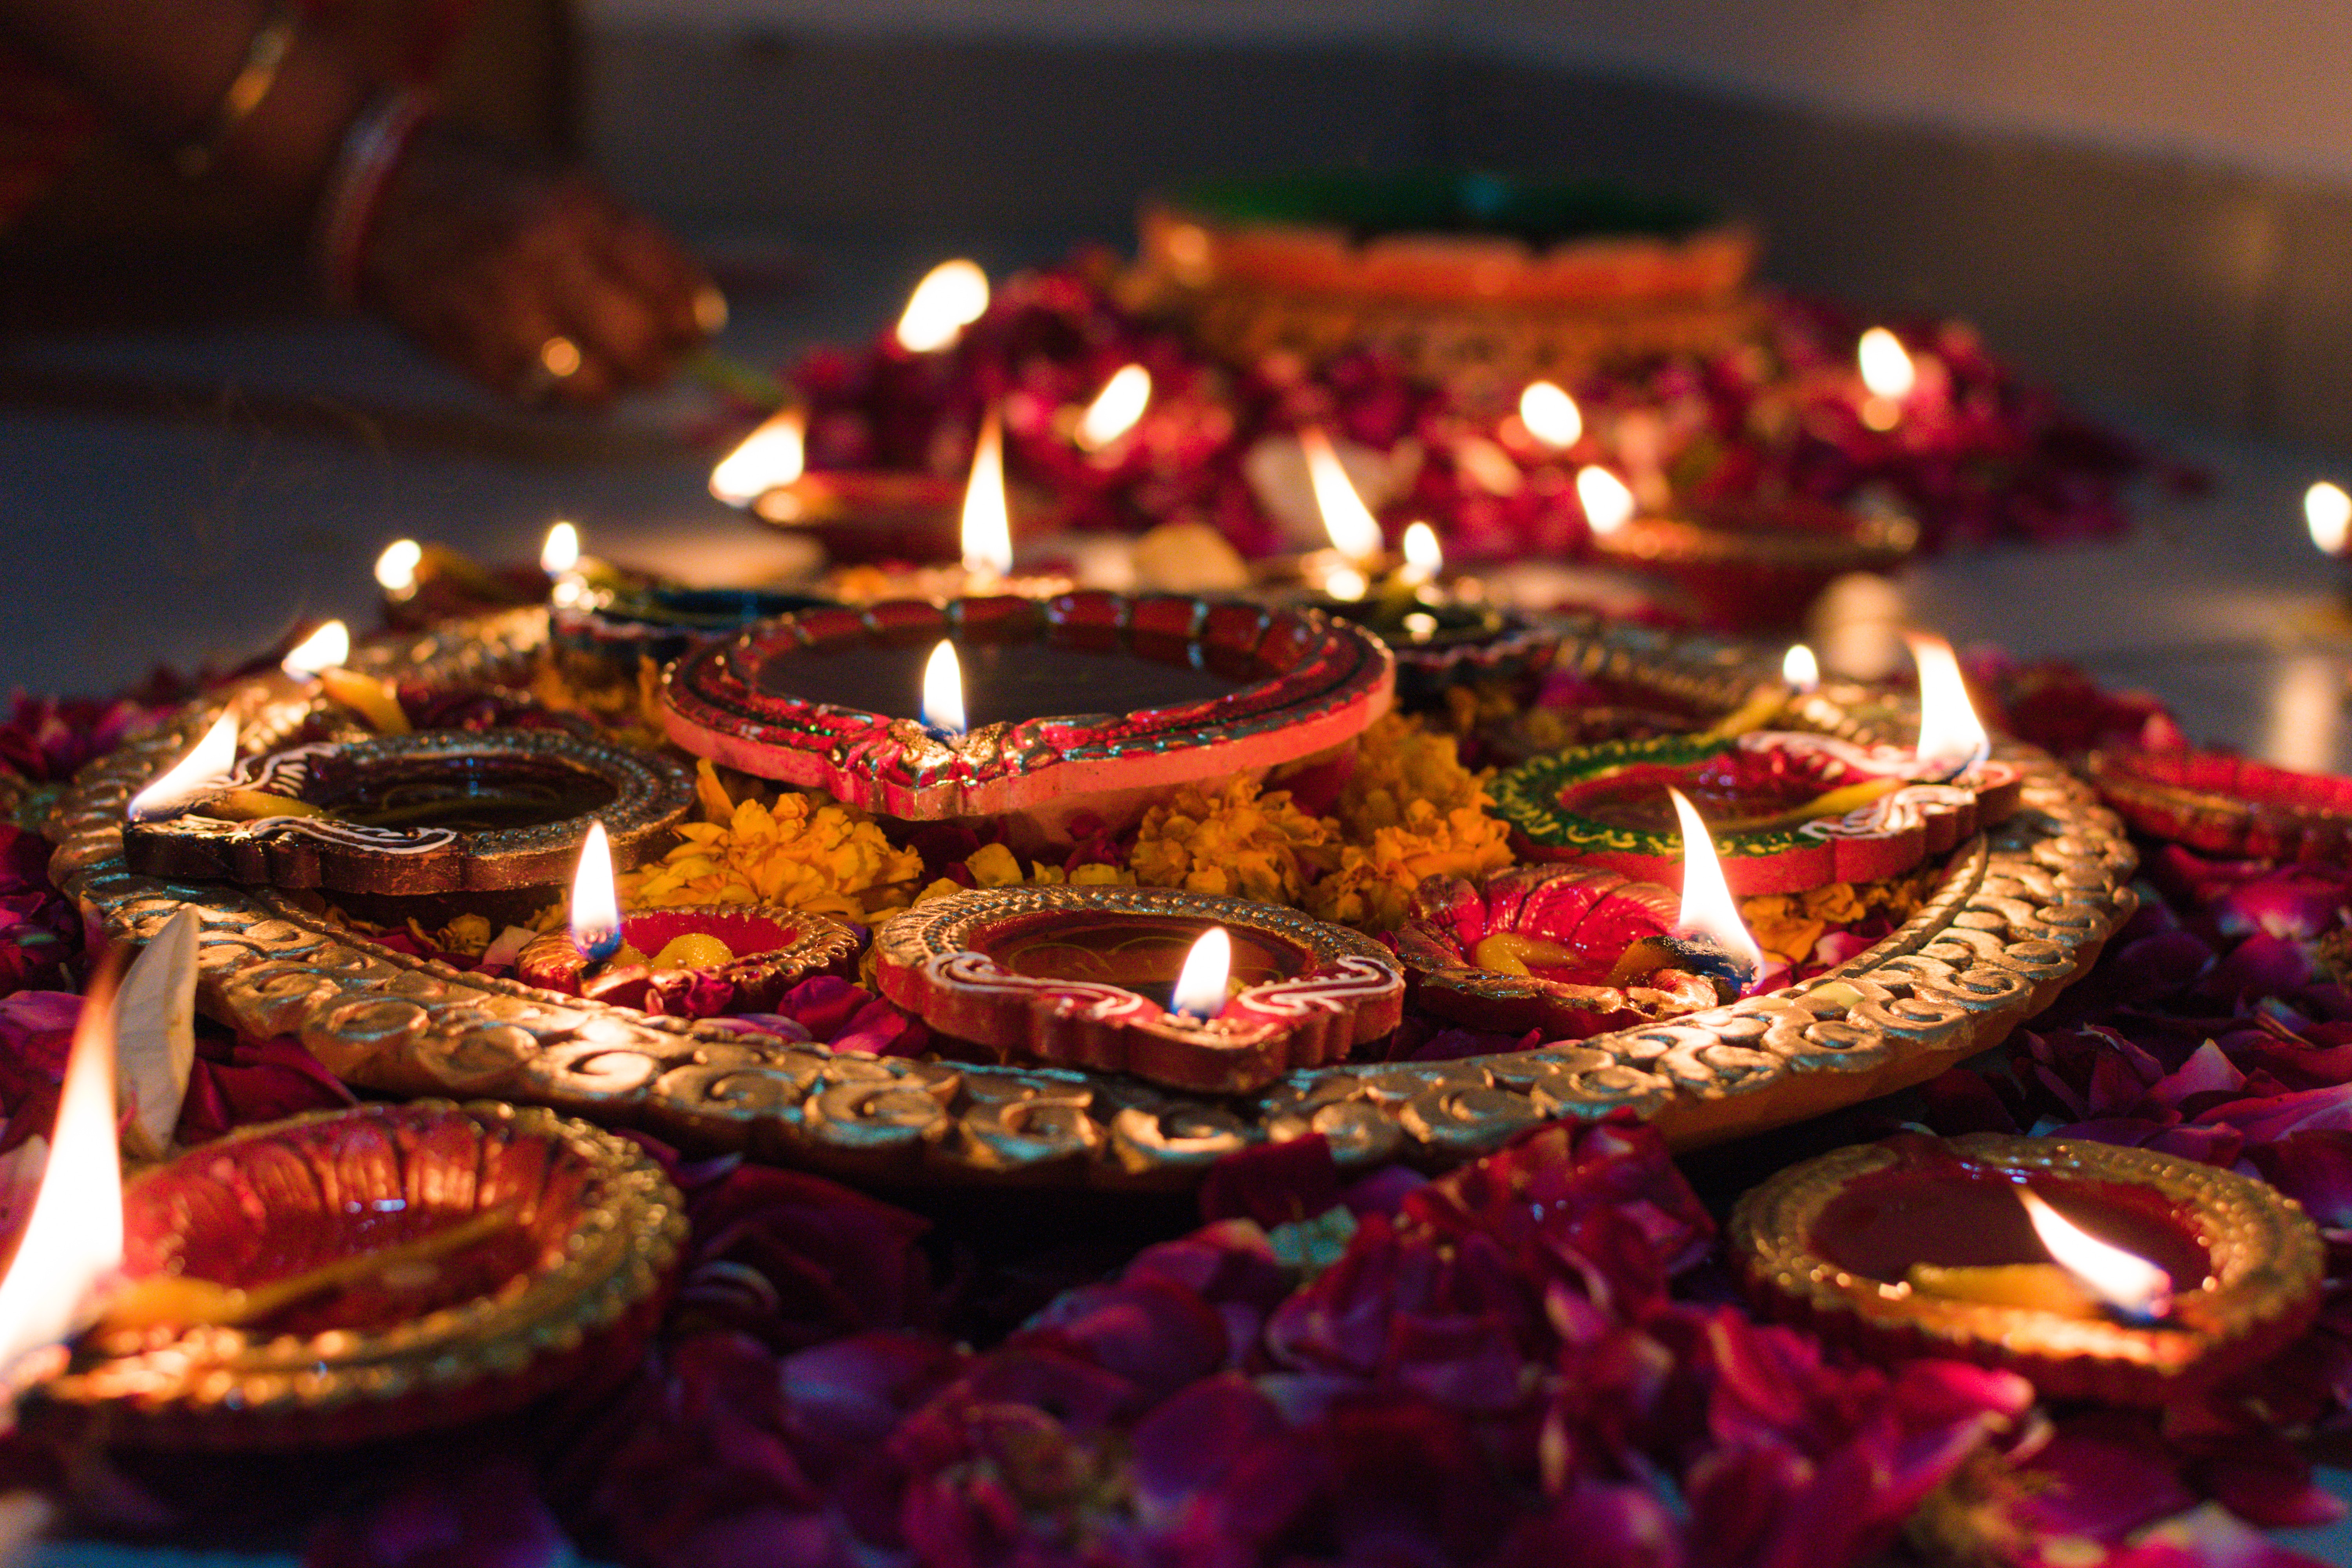 Diwali Expressions 2020, 2021 – We celebrated Diwali by lighting many Diyas with music and dance